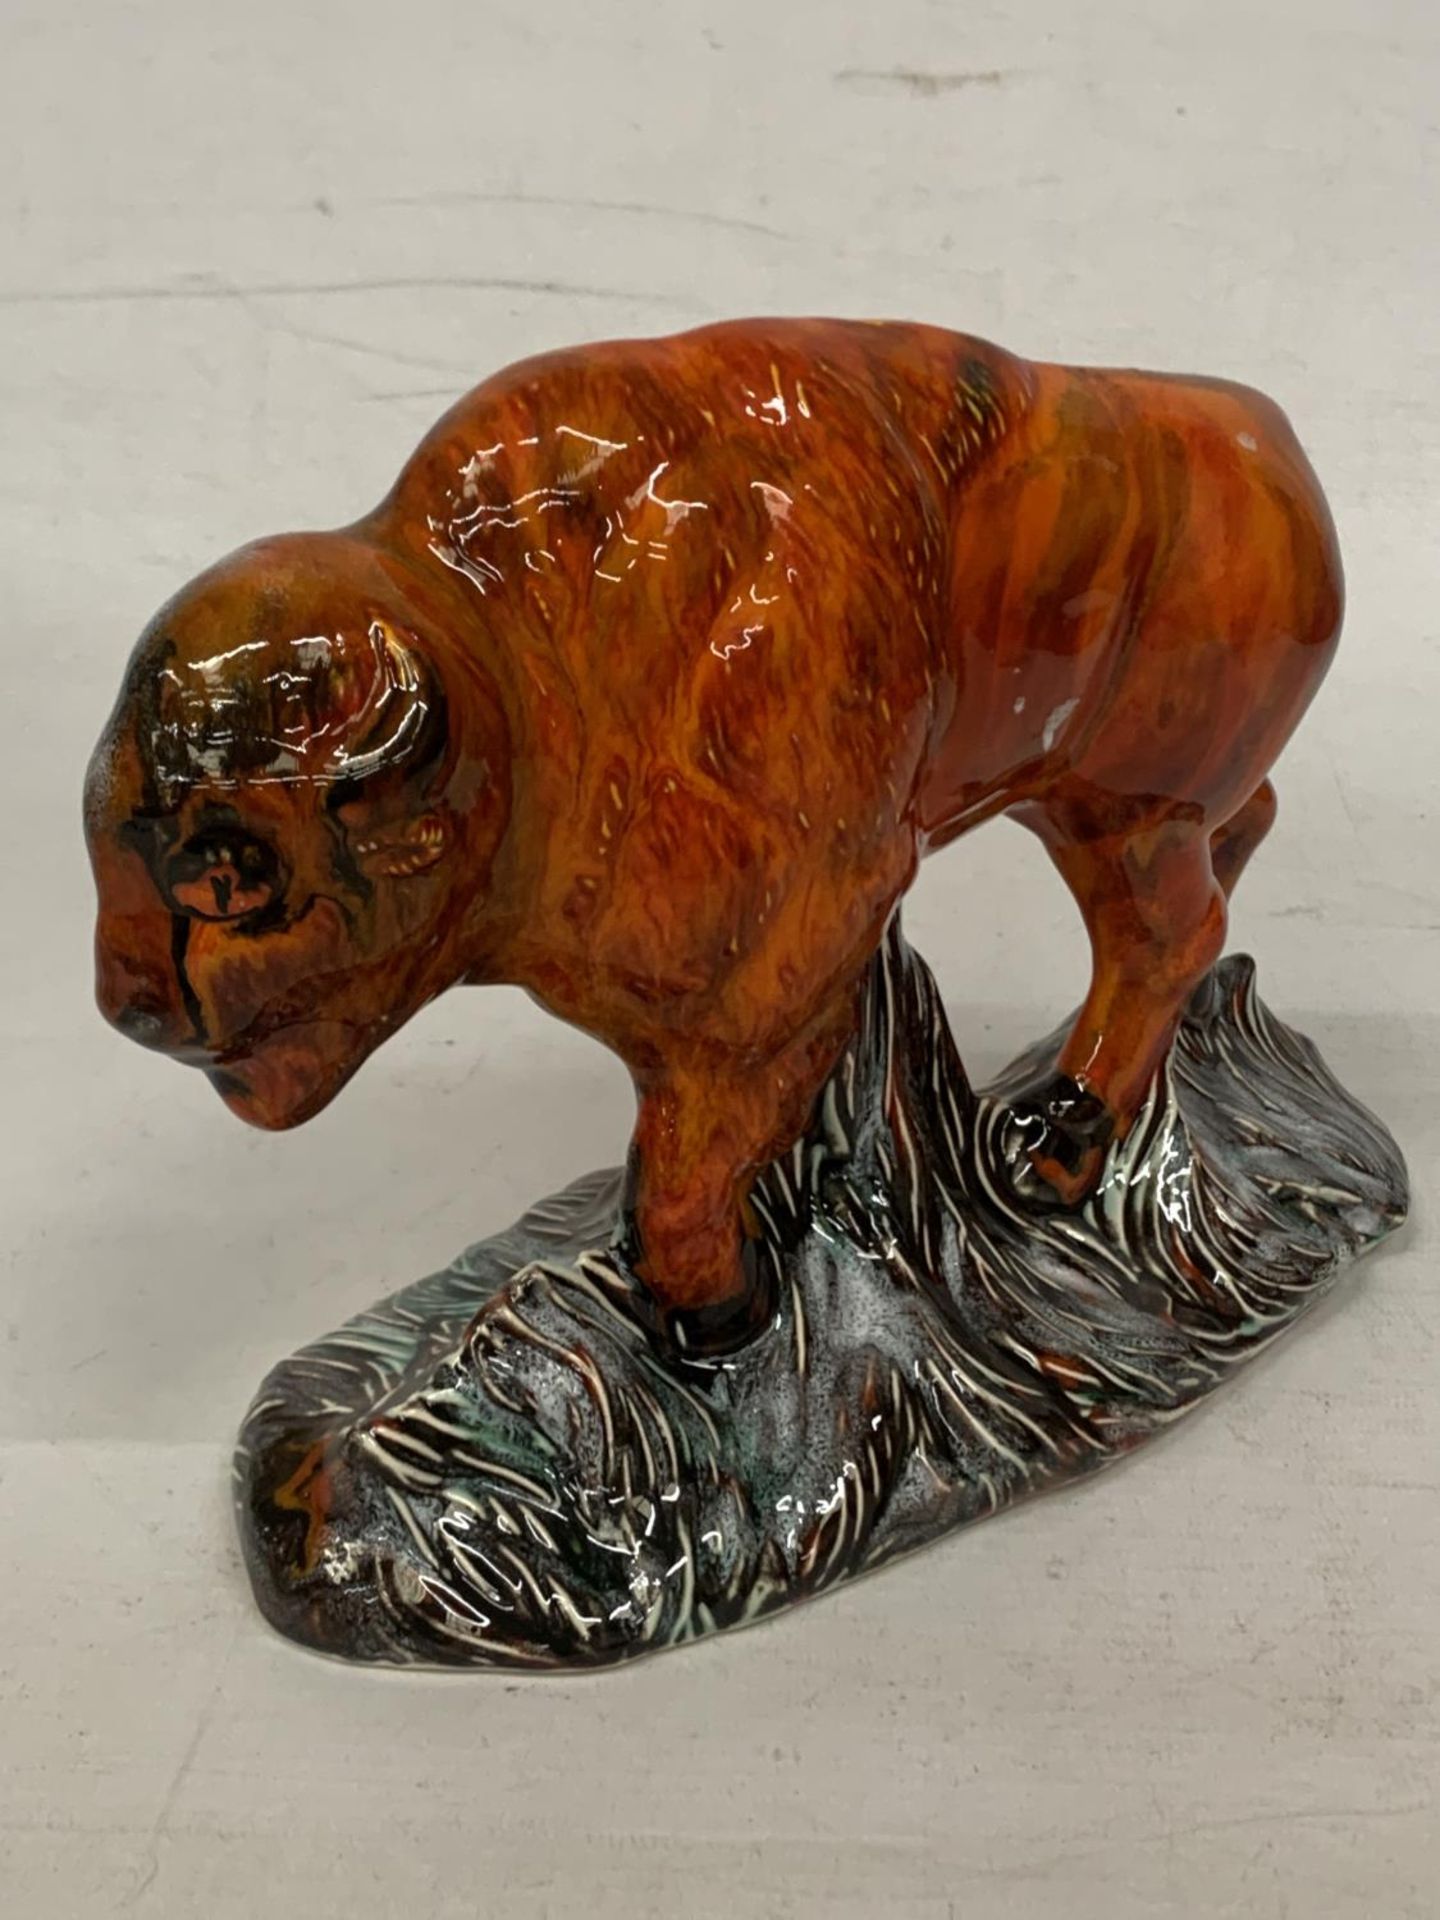 AN ANITA HARRIS BISON (SIGNED IN GOLD) - Image 2 of 4